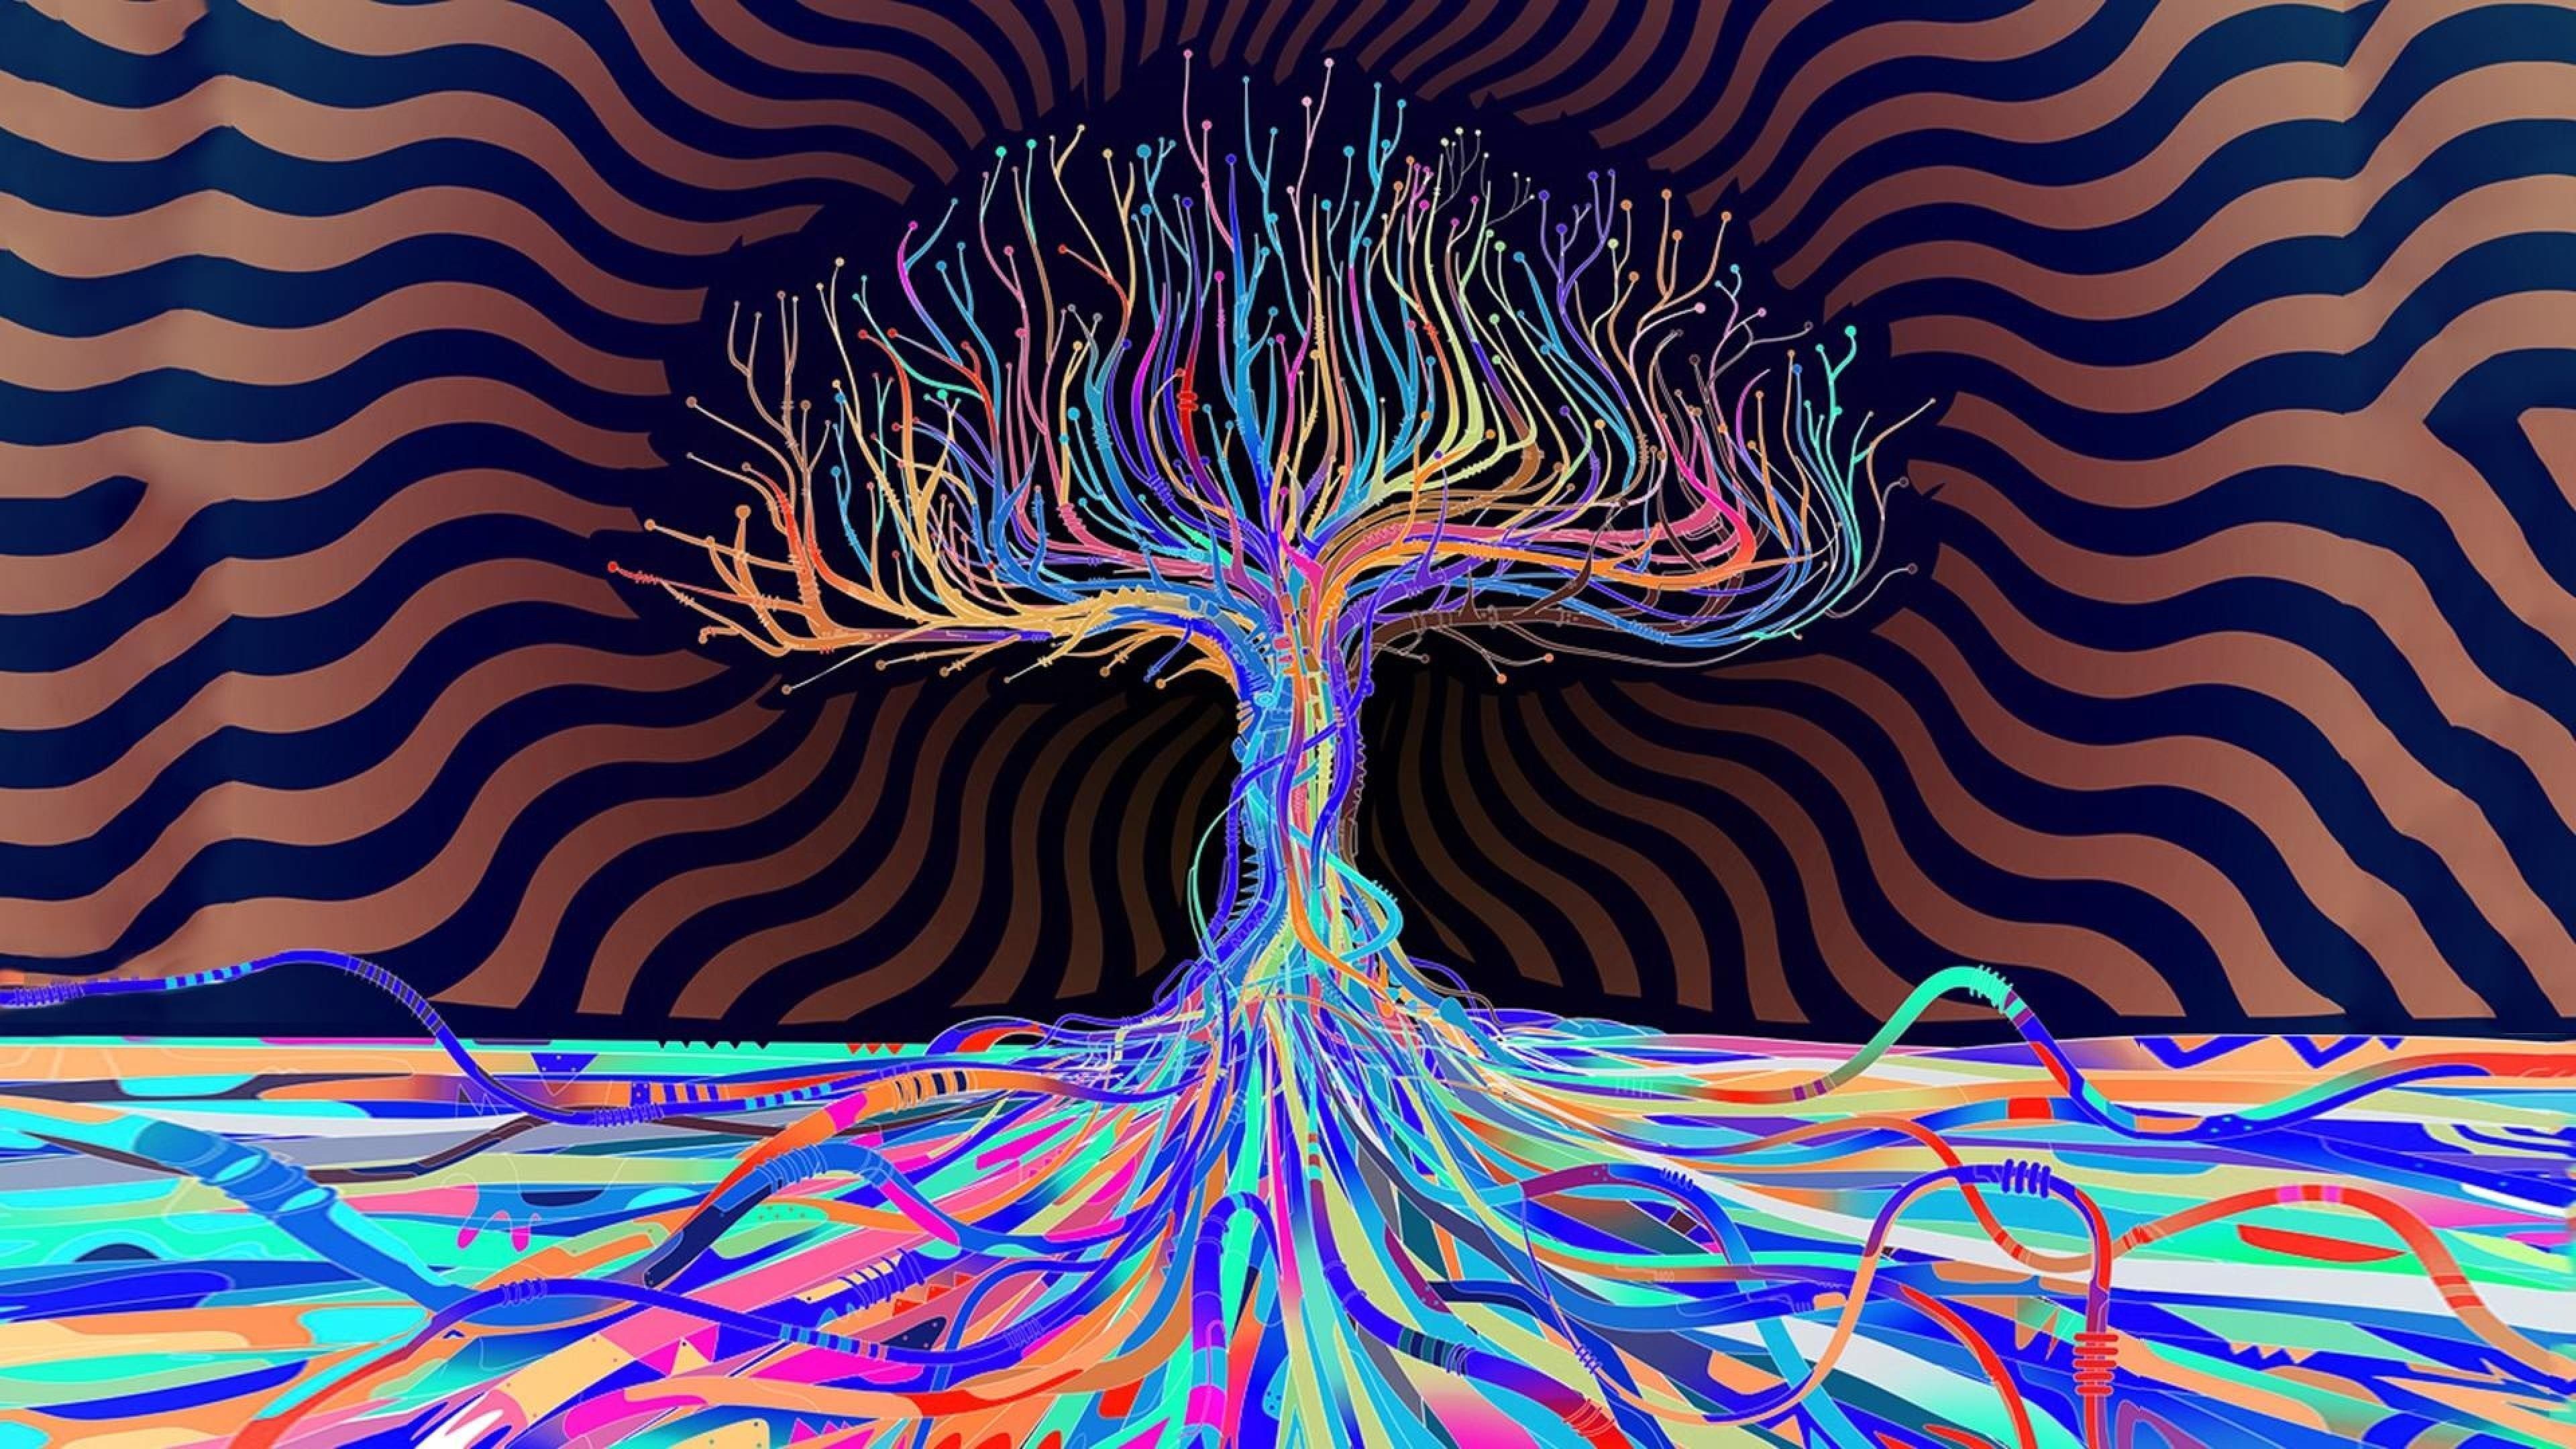 Psychedelic Trippy Wallpapers Hd  1920x1080 Wallpaper  teahubio